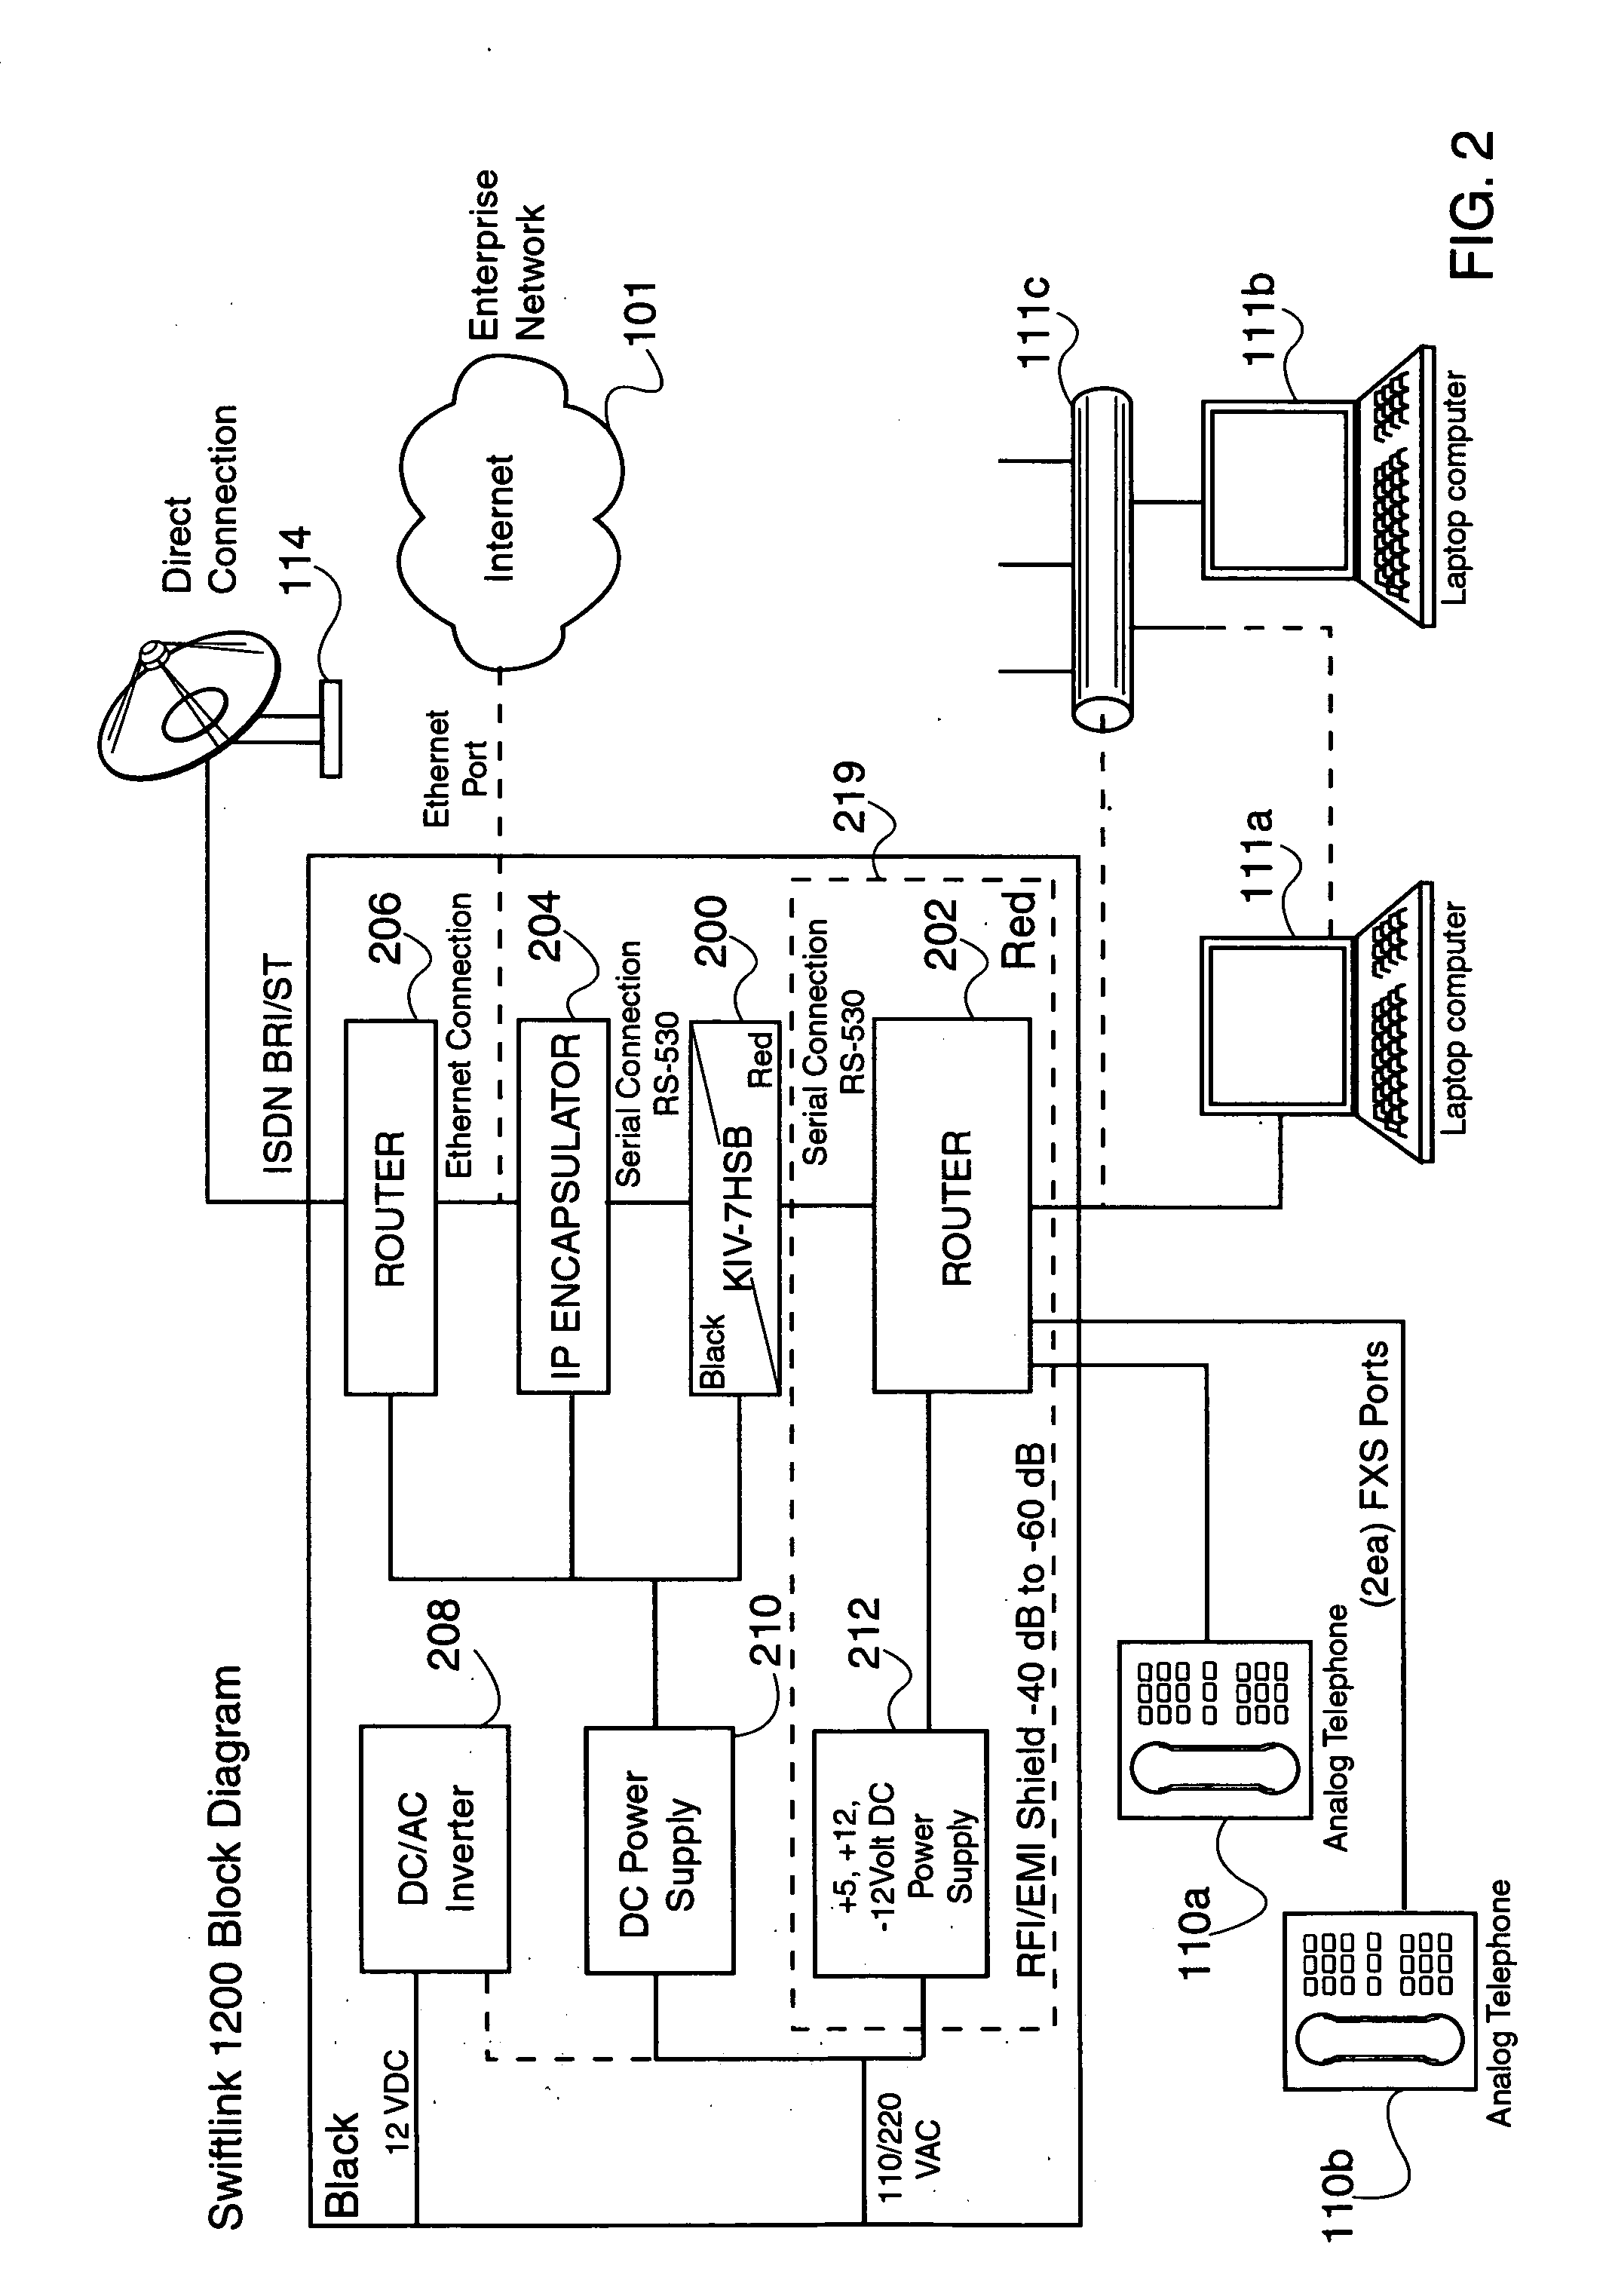 Encapsulation of secure encrypted data in a deployable, secure communication system allowing benign, secure commercial transport